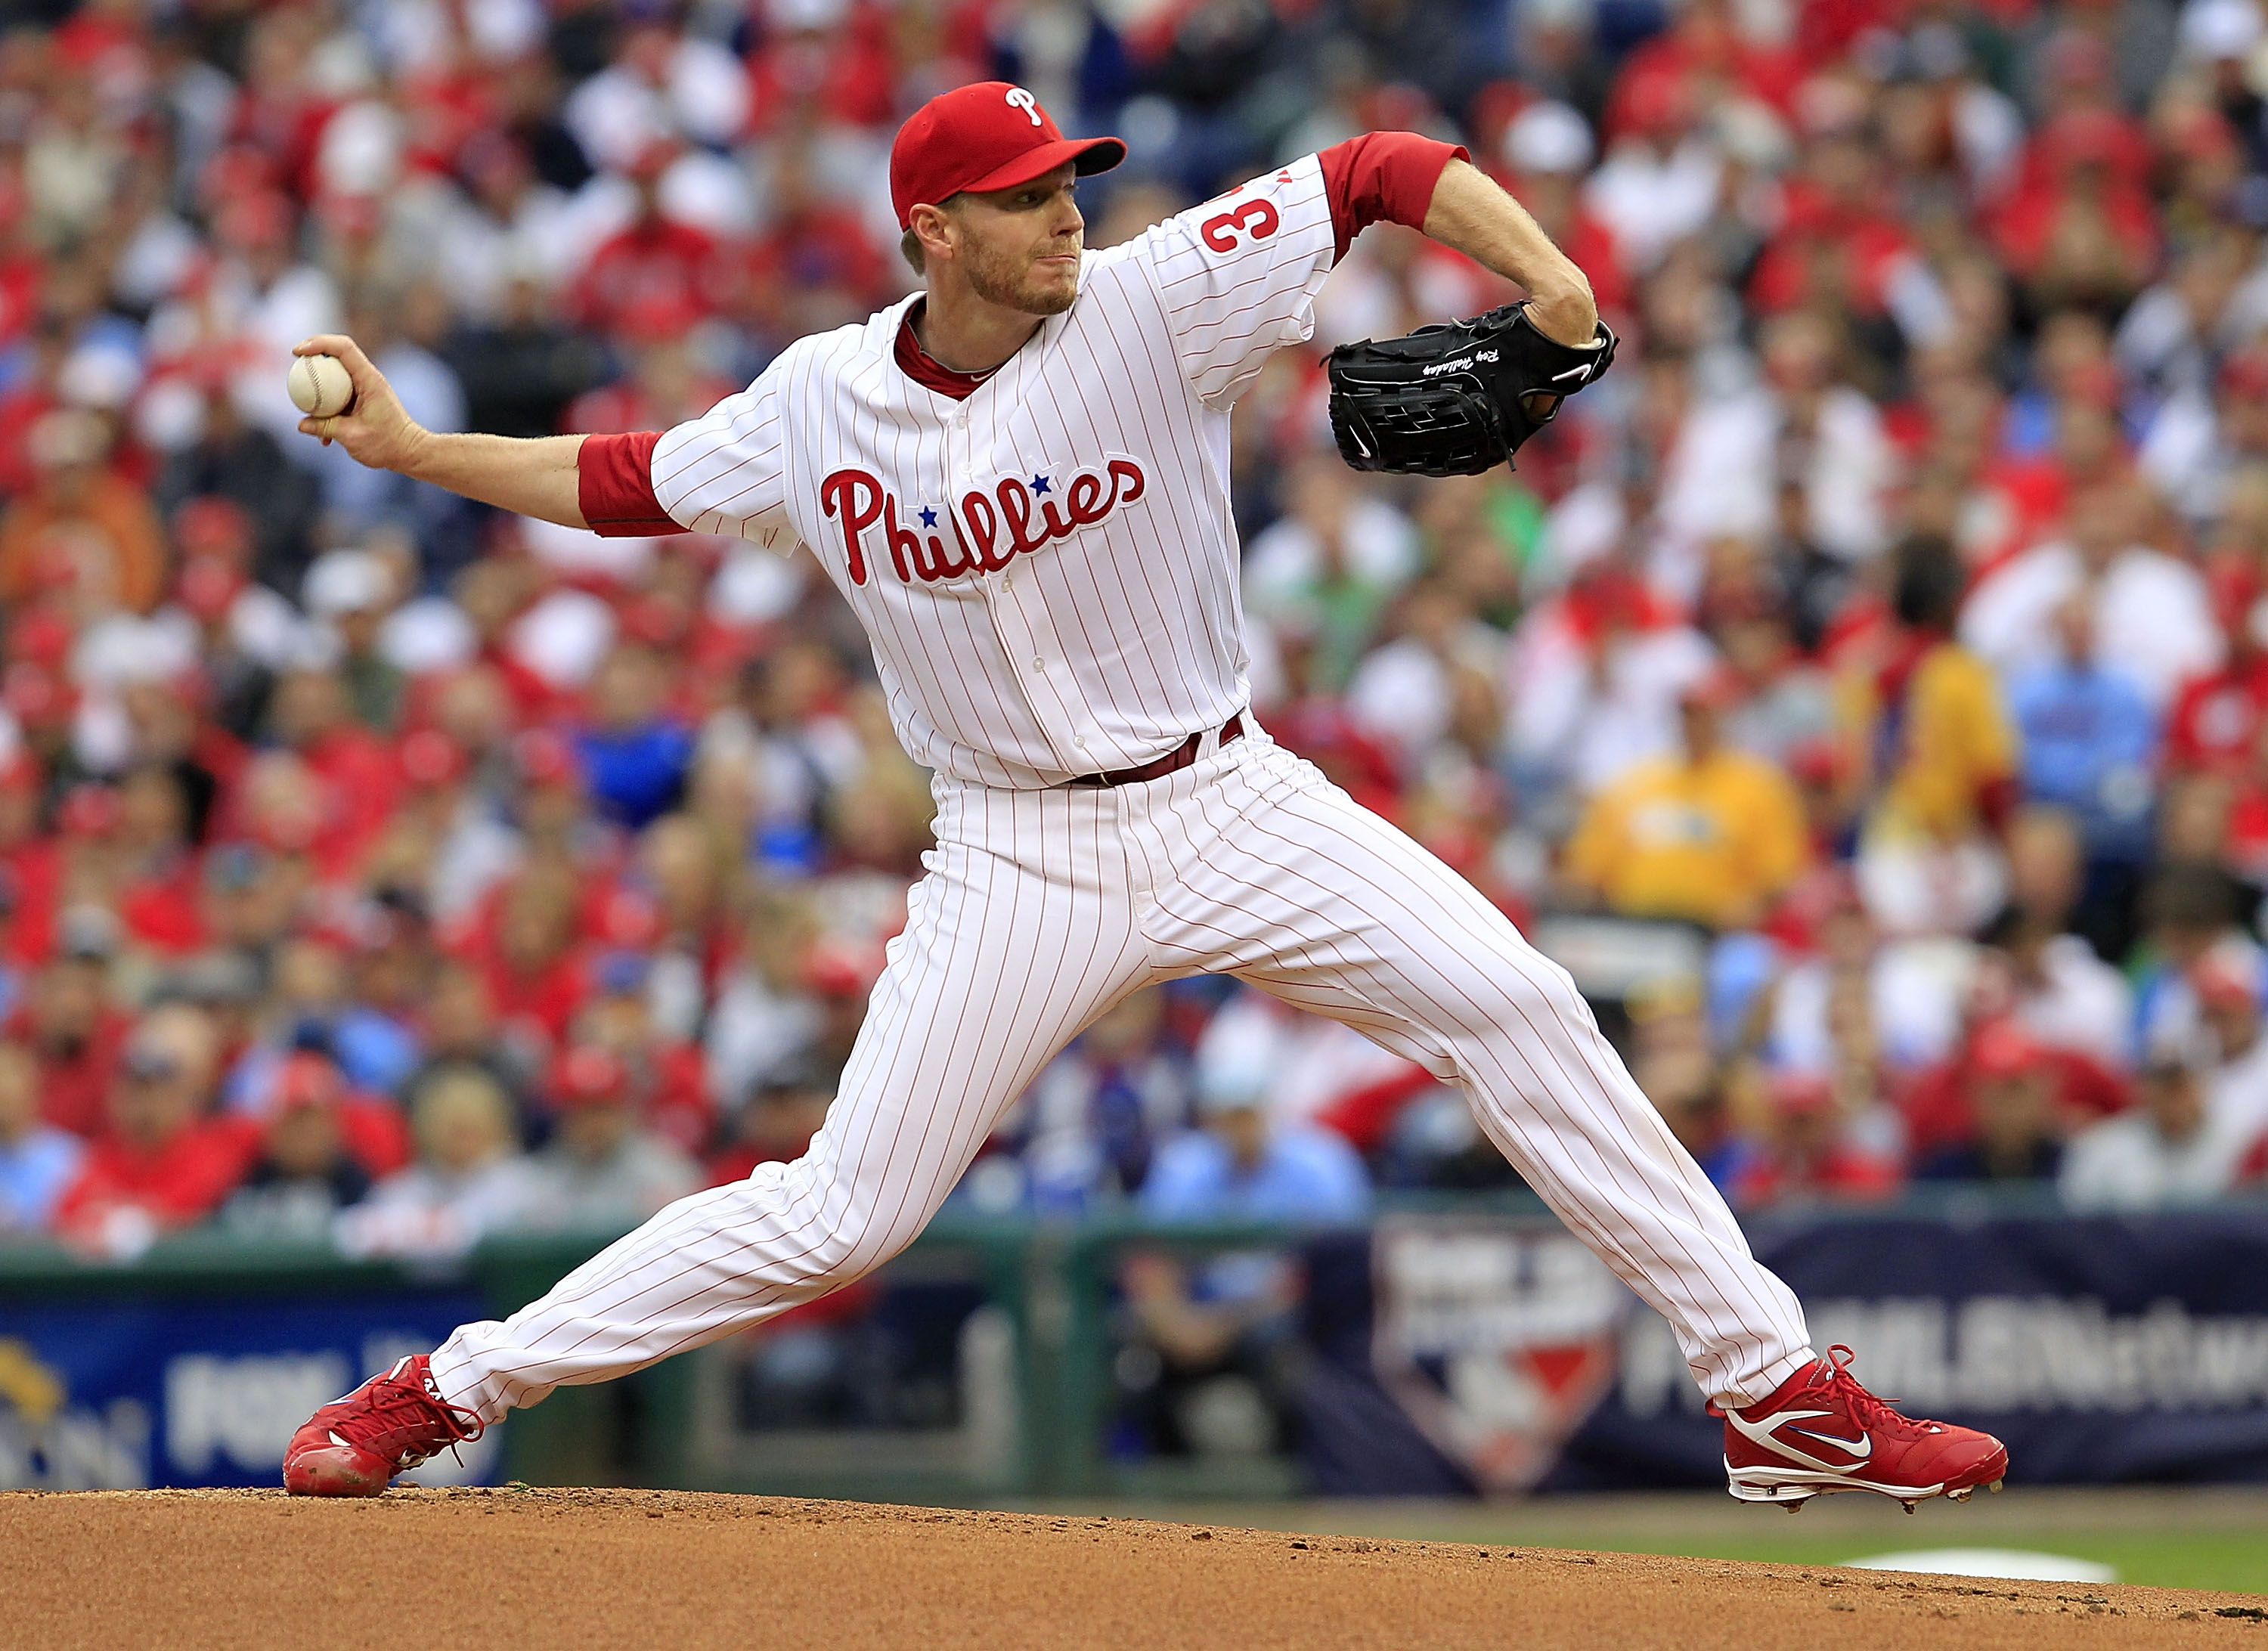 Roy Halladay No-Hitter: 10 Greatest Pitching Performances in MLB